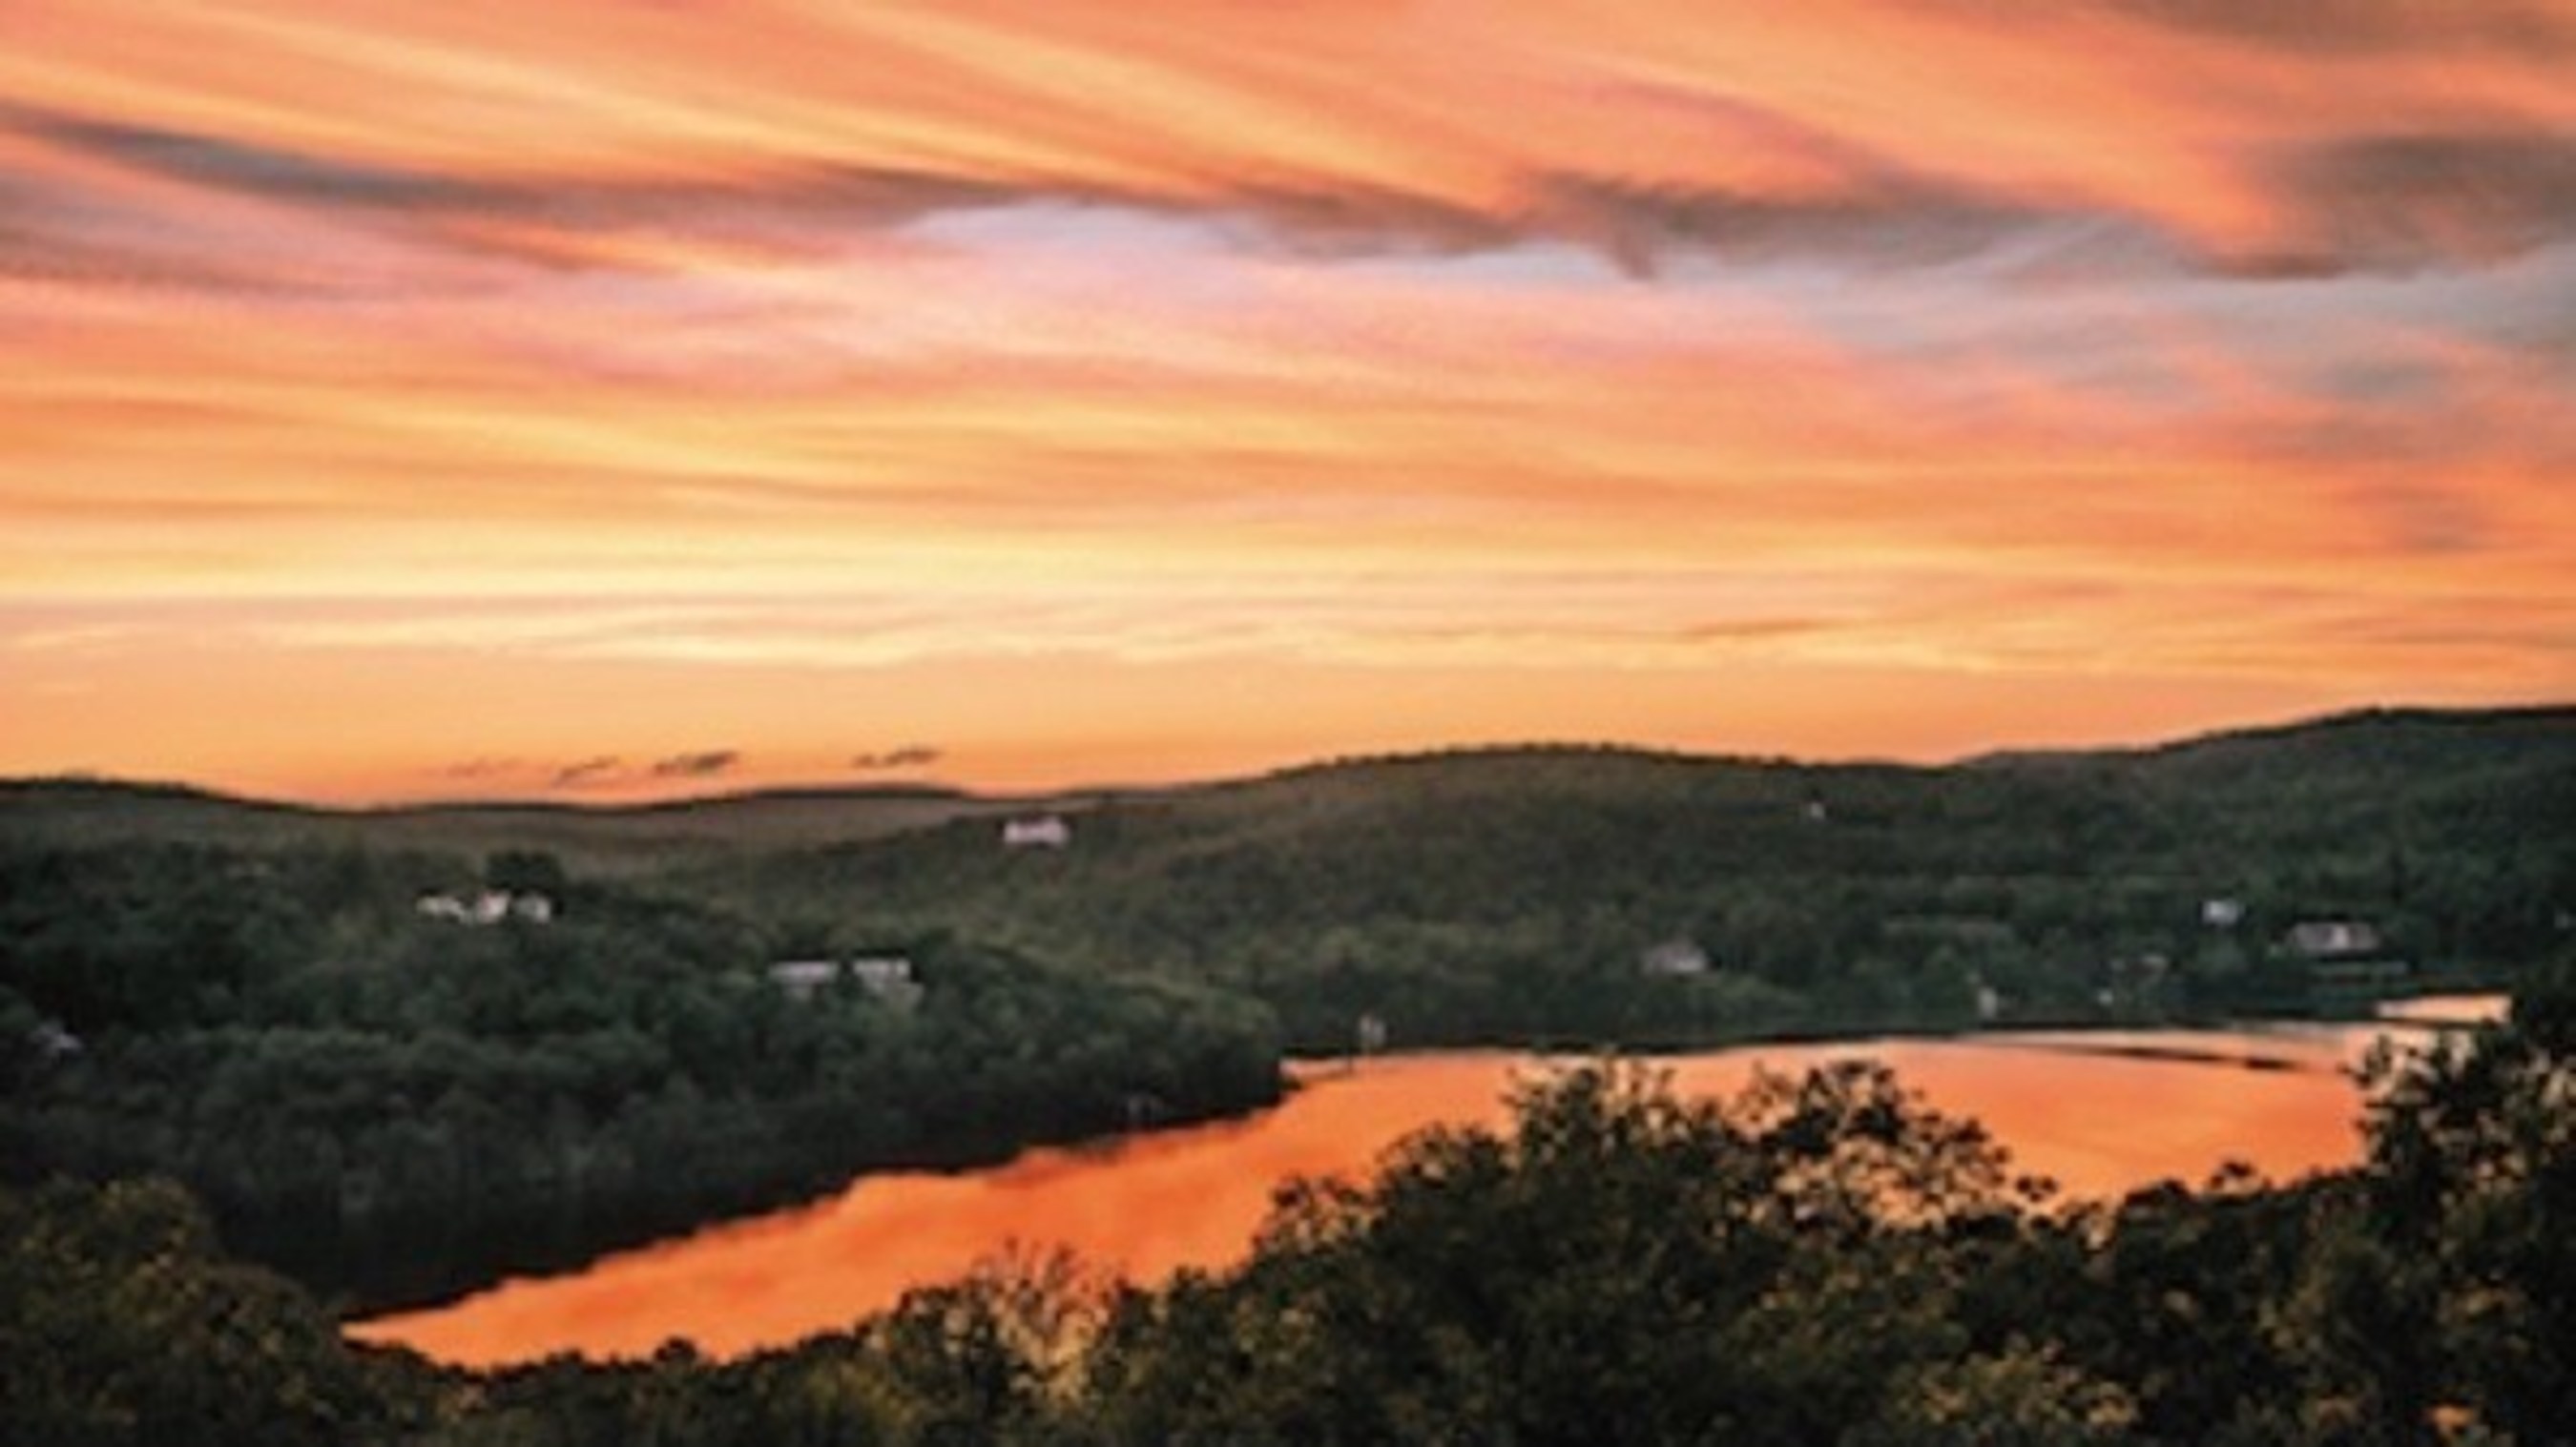 Tuxedo Park: The Gift of Nature, Orange sky over Tuxedo Park, pages 48 and 49